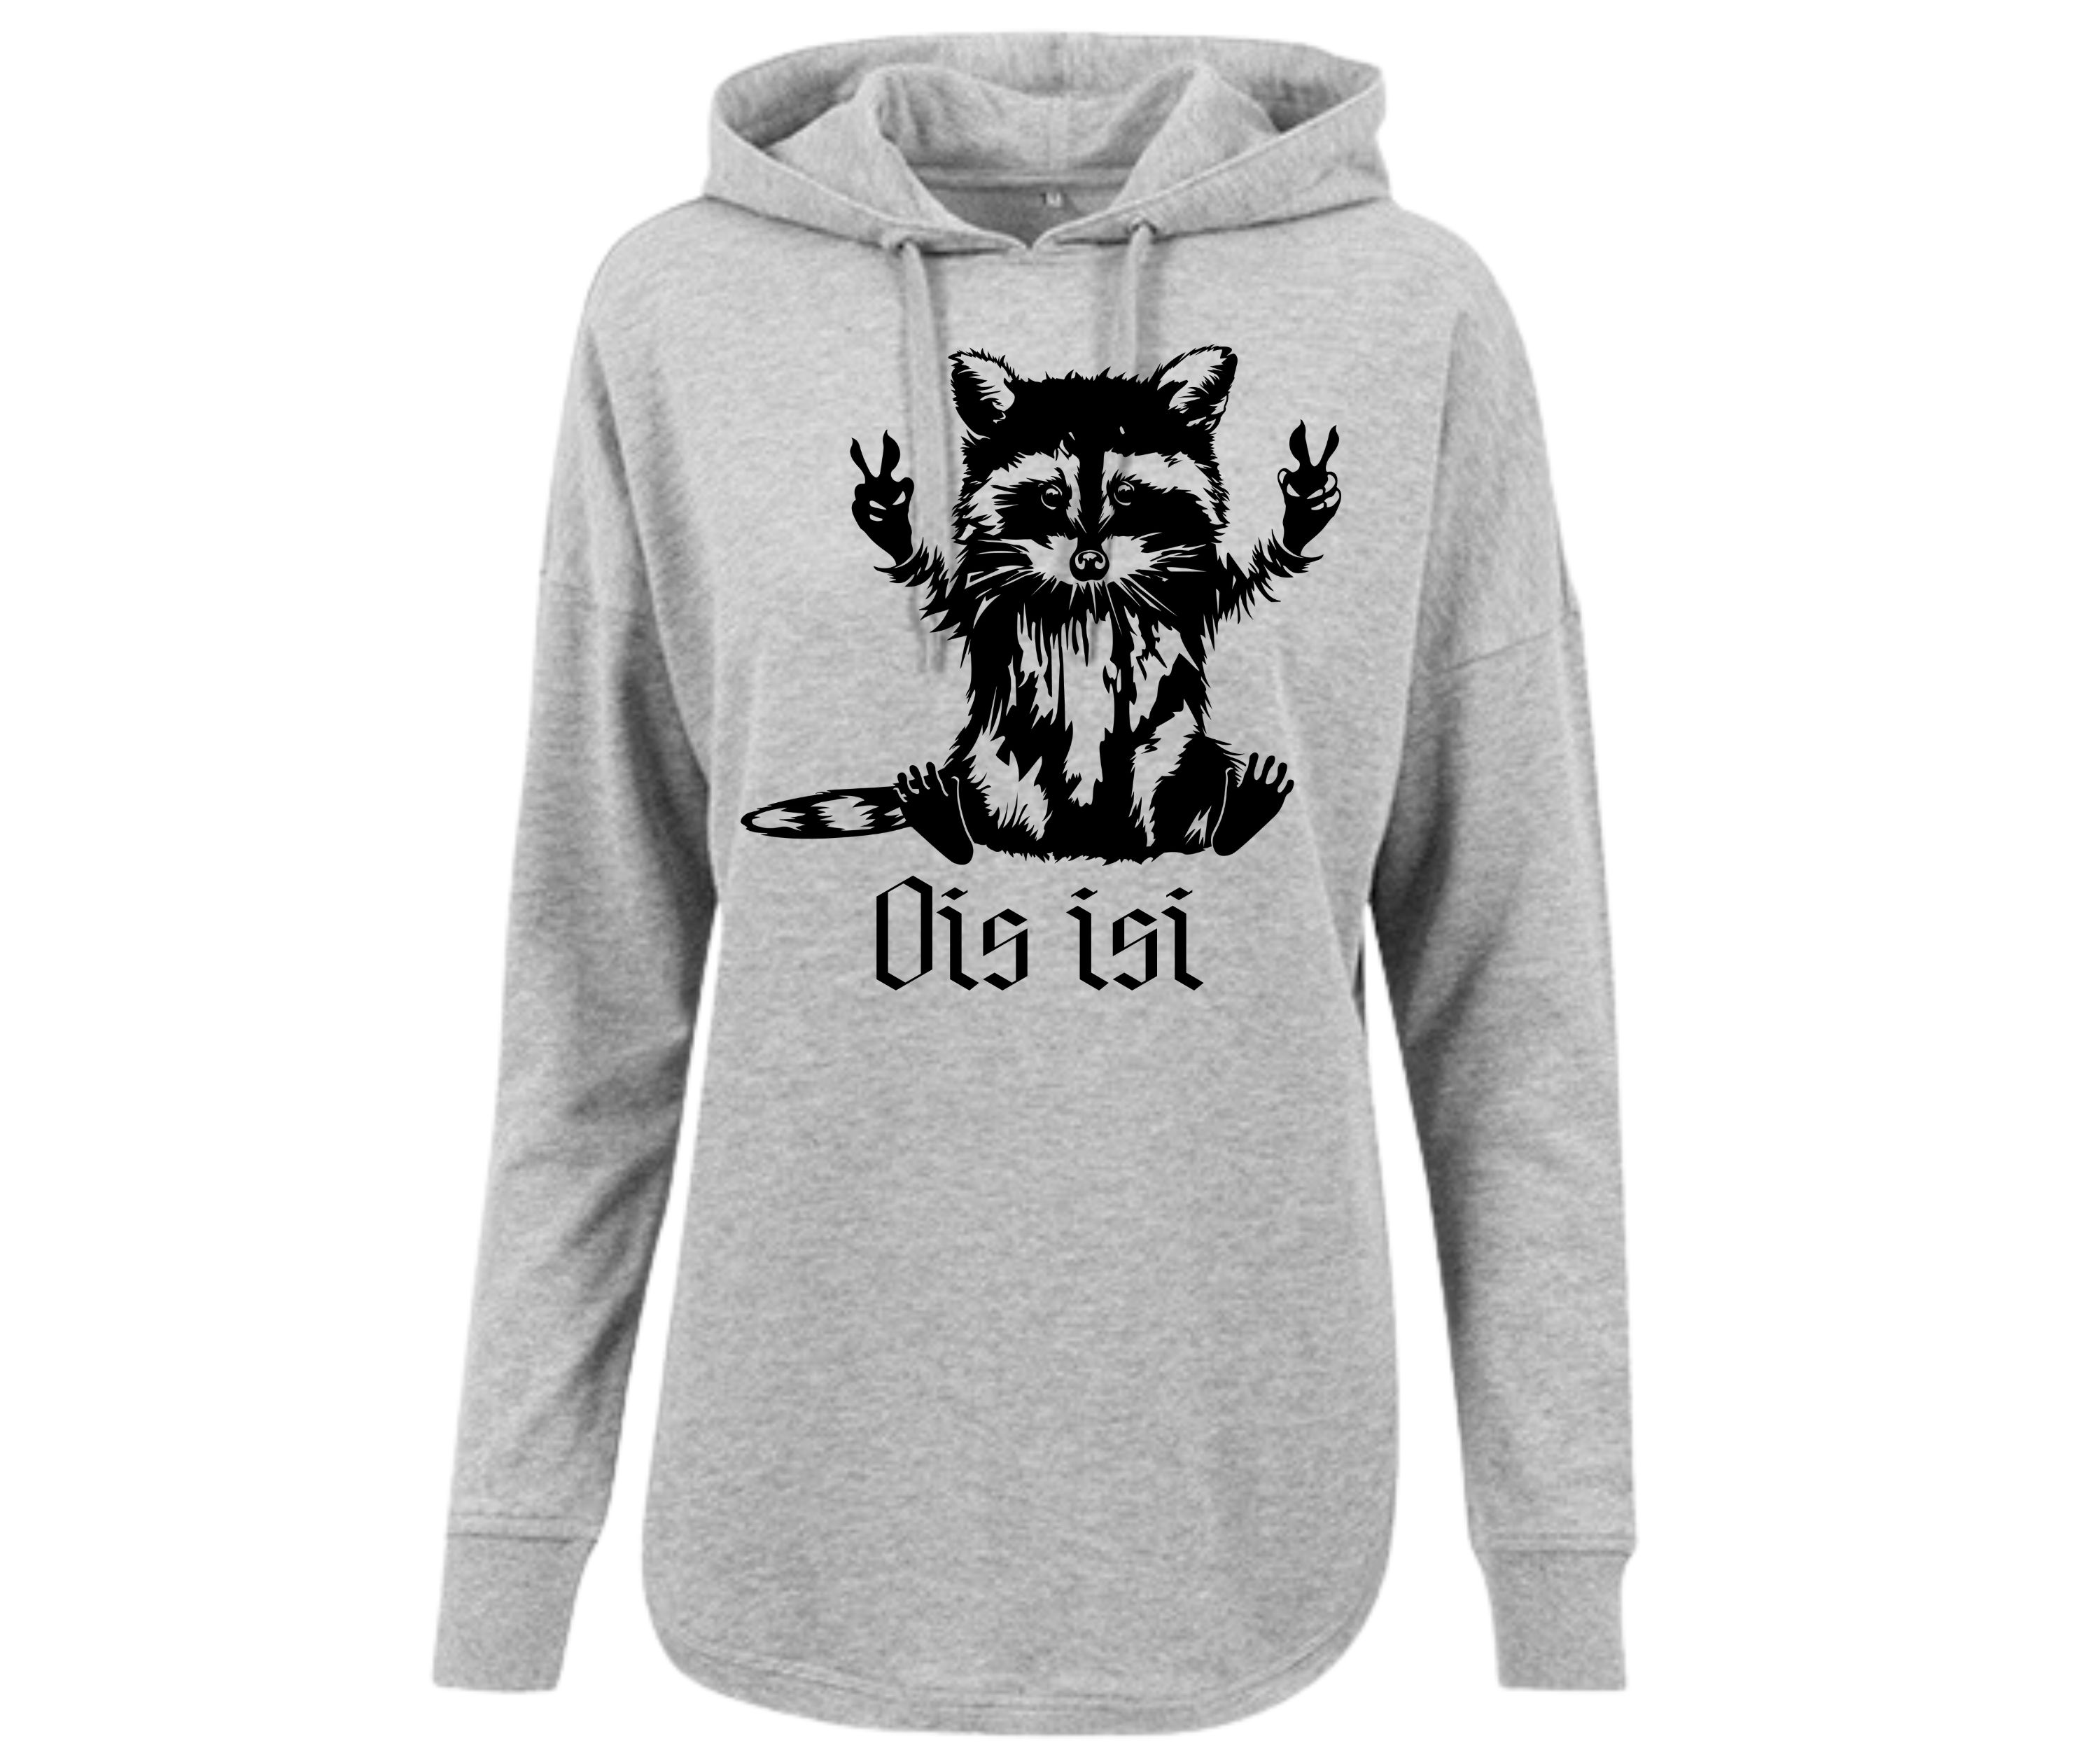 Hoodie Waschbär Fred Ois isi Oversized Black L